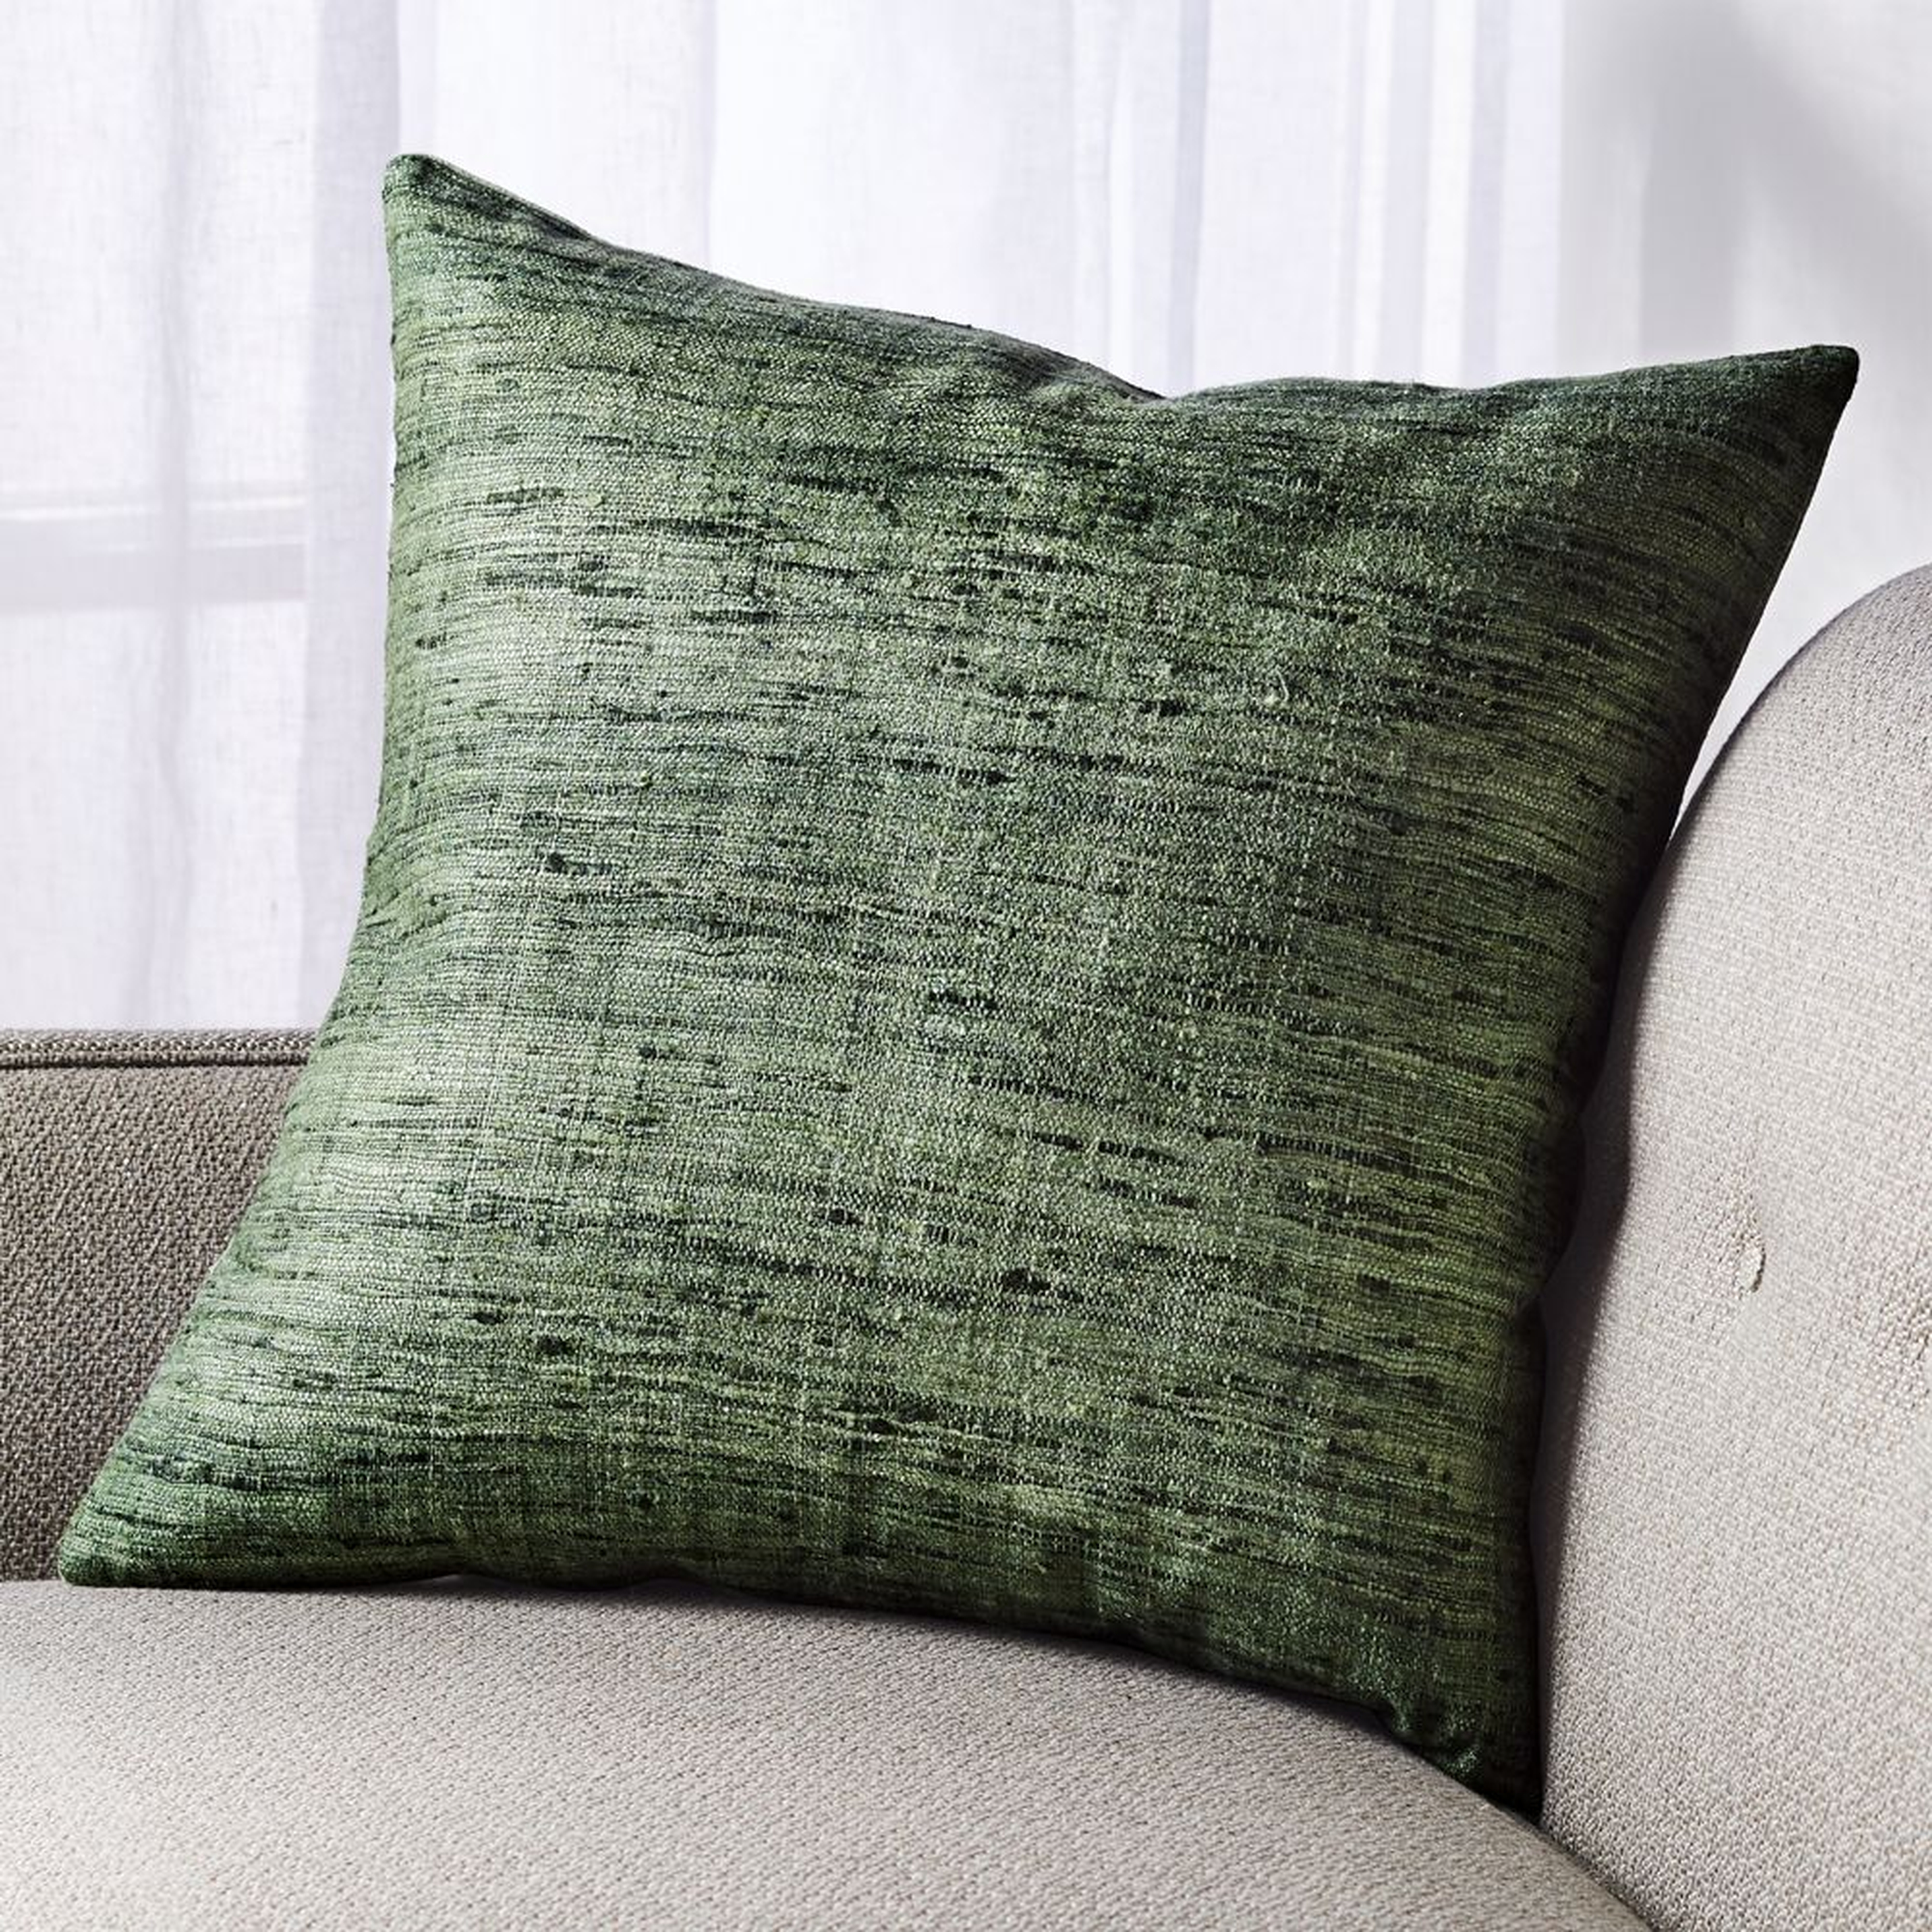 Trevino Agave Green Pillow with Down-Alternative Insert 20" - Crate and Barrel